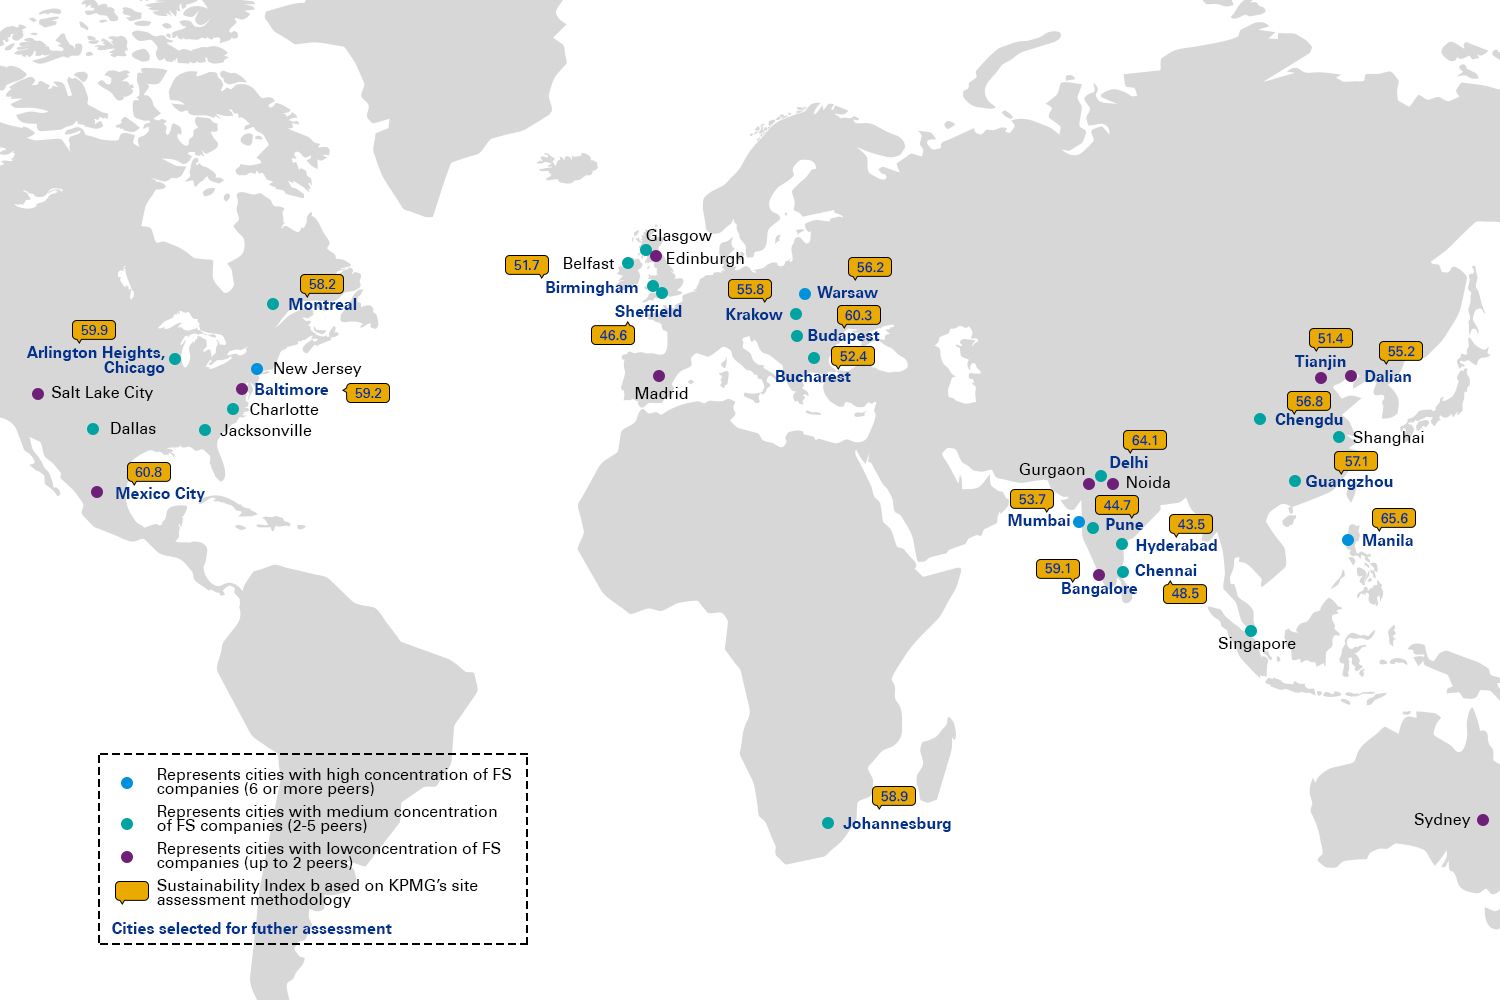 Finance sourcing footprint for Global Financial Services organisations